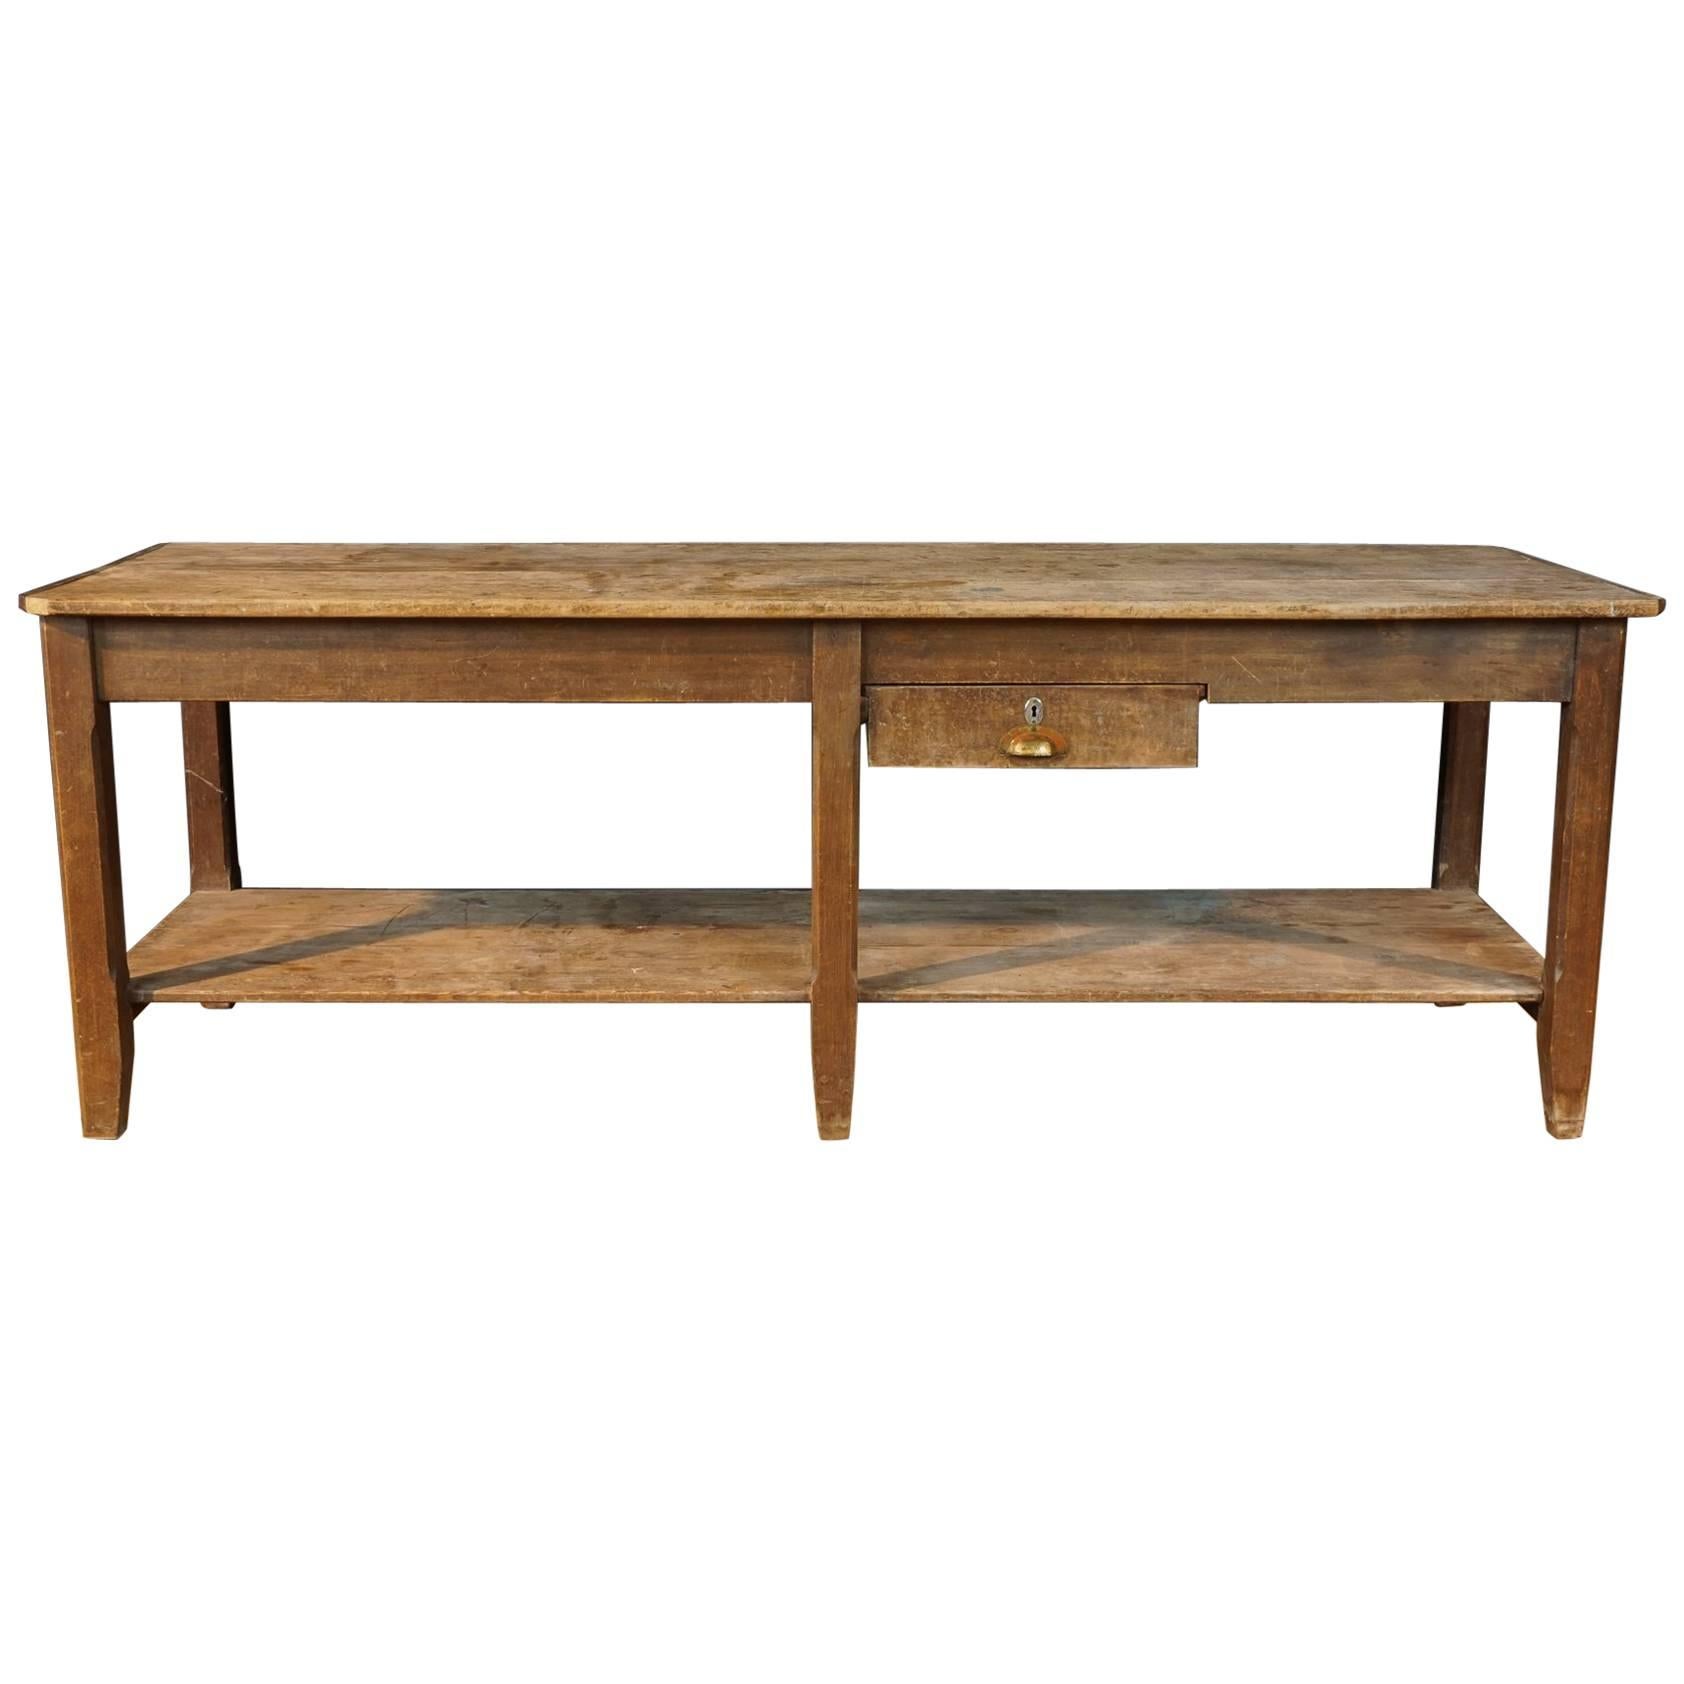 French Console Table, circa 1900